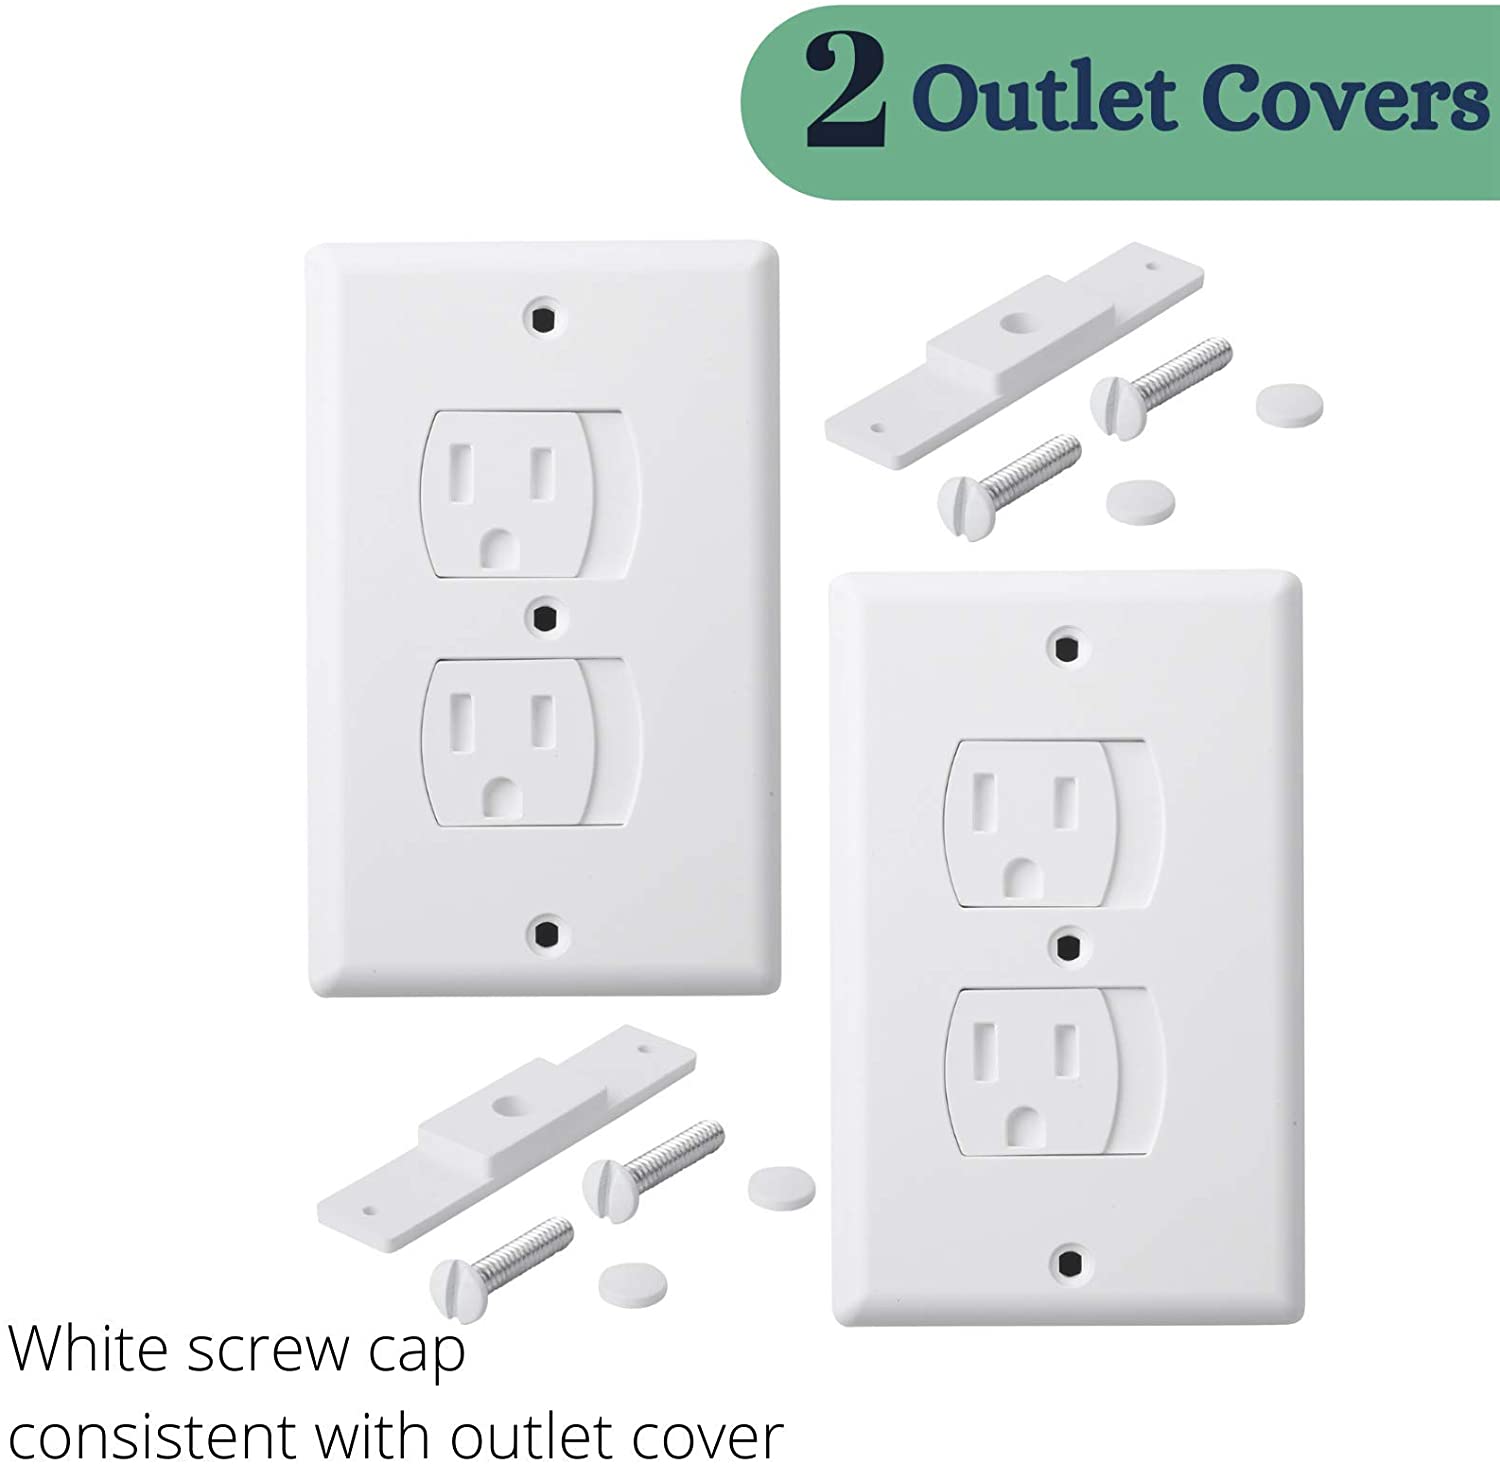 Bates - Baby Safety Outlet Cover Box, Outlet Covers Baby Proofing, Plug Covers for Electrical Outlets, Baby Proof Outlet Covers, Socket Covers for